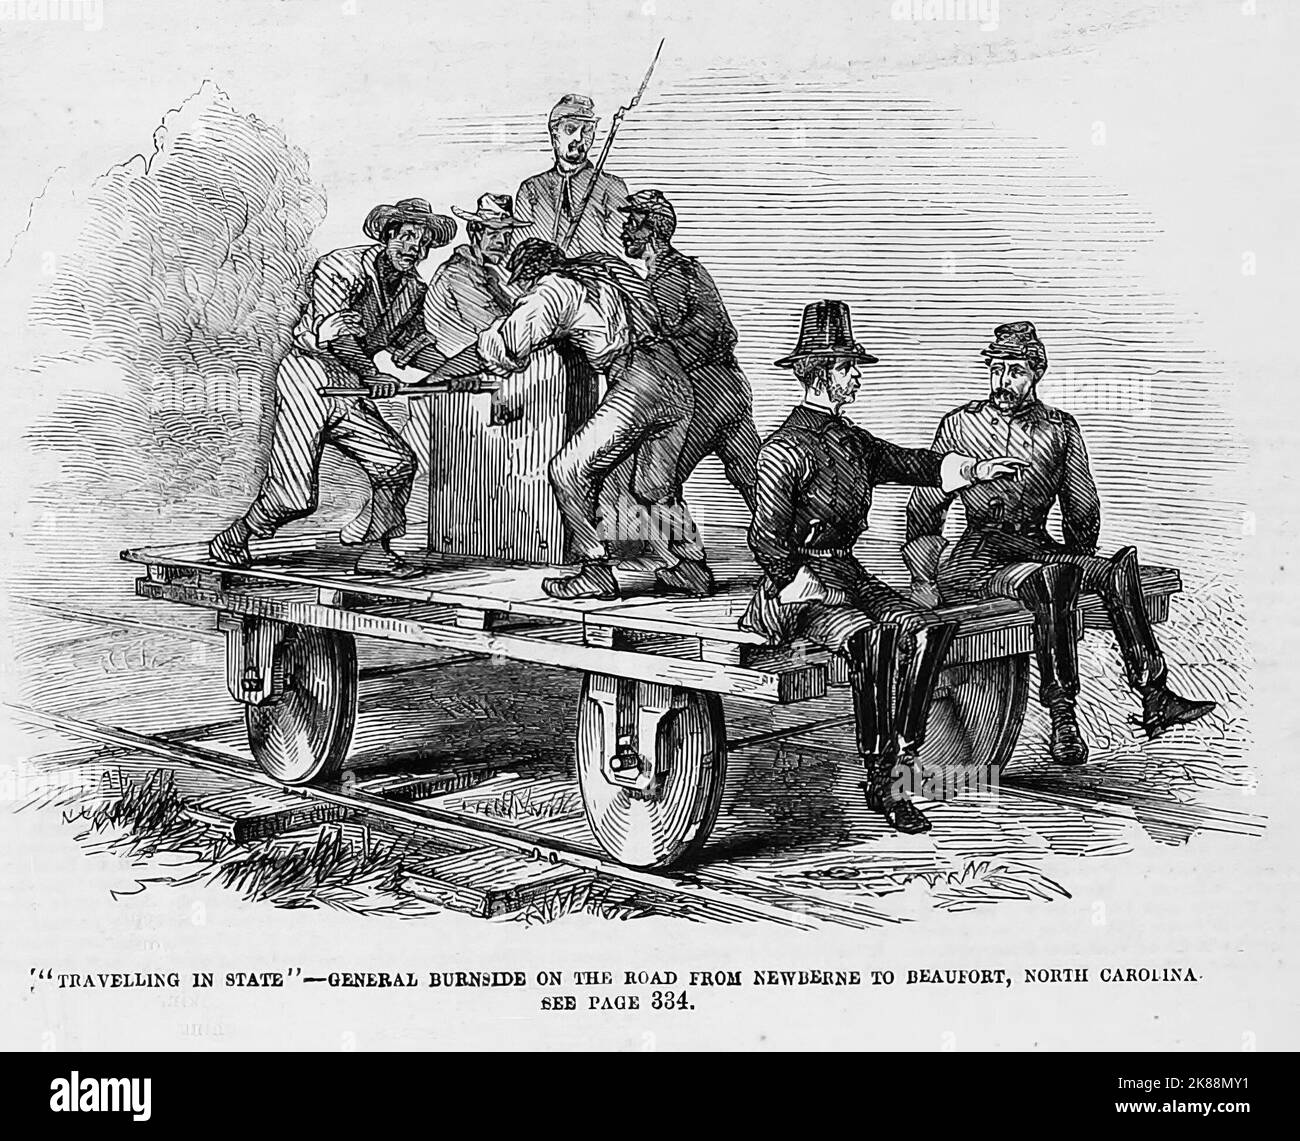 'Travelling in State' - General Ambrose Everett Burnside on the road from New Bern to Beaufort, North Carolina. August 1862. 19th century American Civil War illustration from Frank Leslie's Illustrated Newspaper Stock Photo